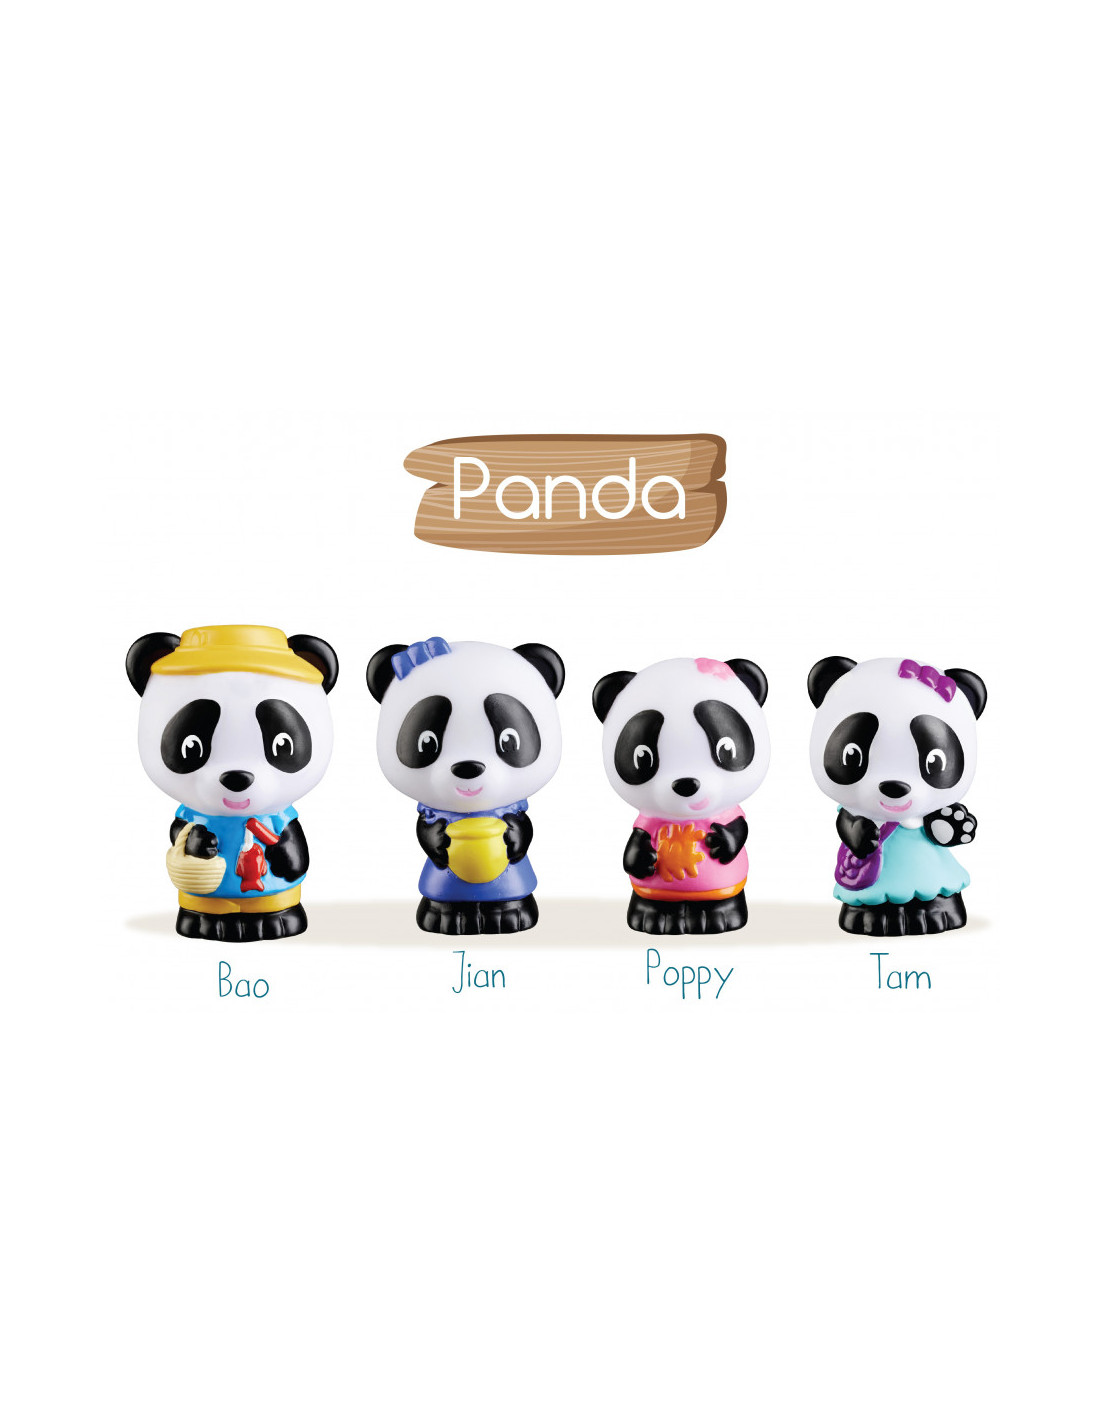 https://www.lapouleapois.fr/50683-thickbox_default/4-personnages-famille-panda-klorofil.jpg